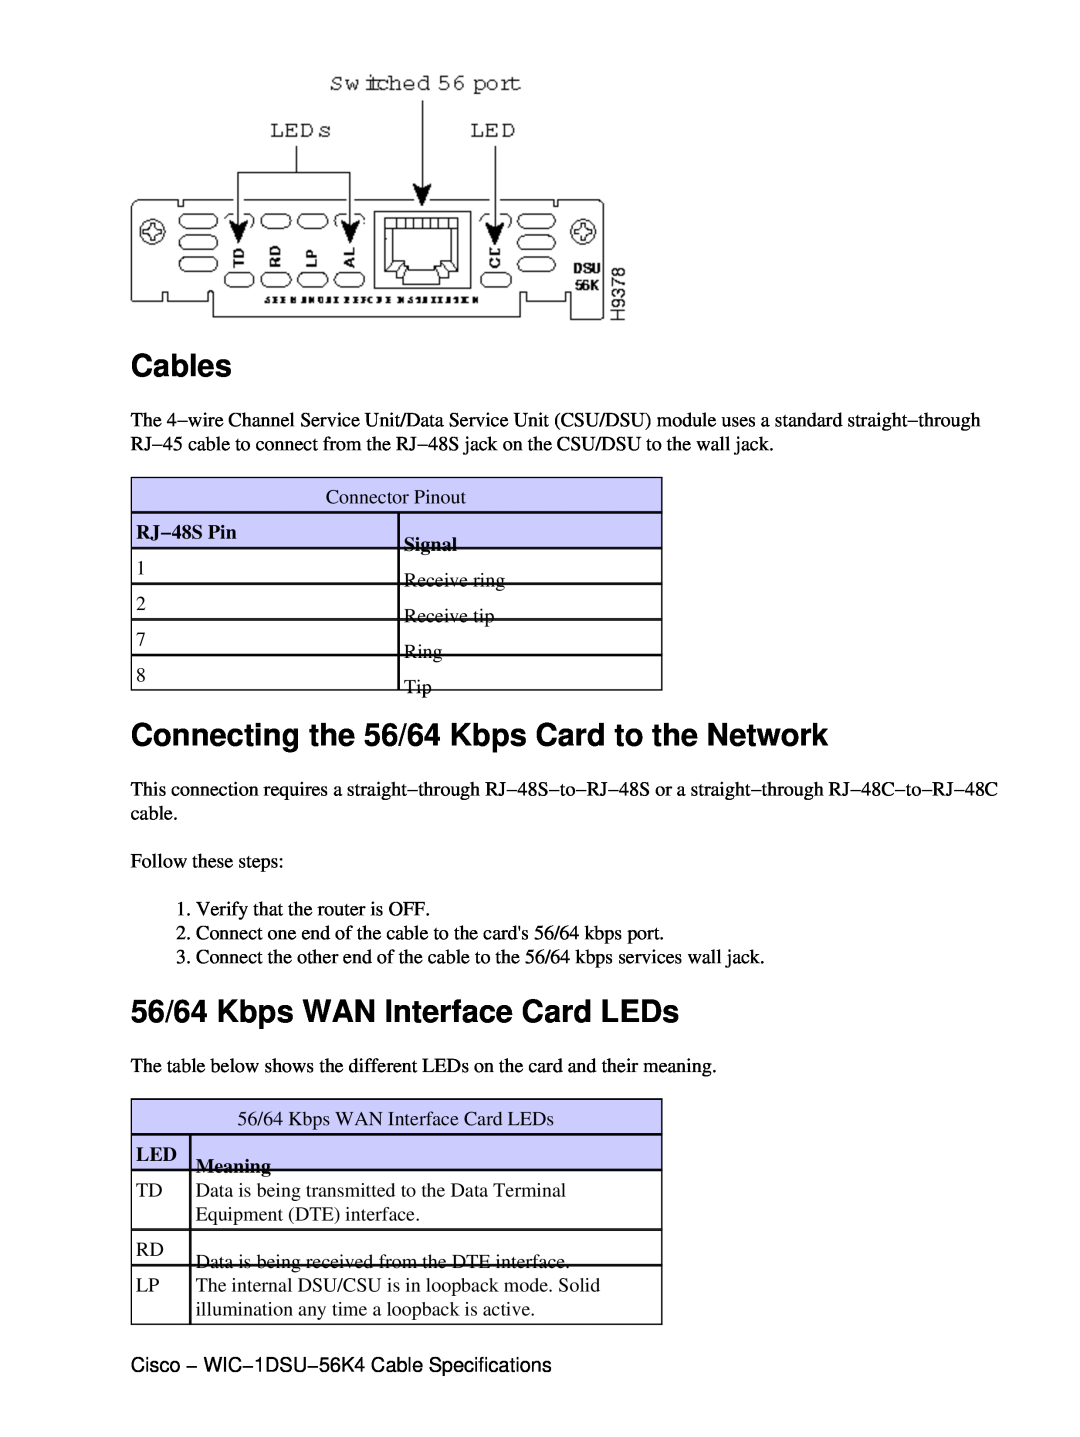 Cisco Systems WIC-1DSU-56K4 Cables, Connecting the 56/64 Kbps Card to the Network, 56/64 Kbps WAN Interface Card LEDs 